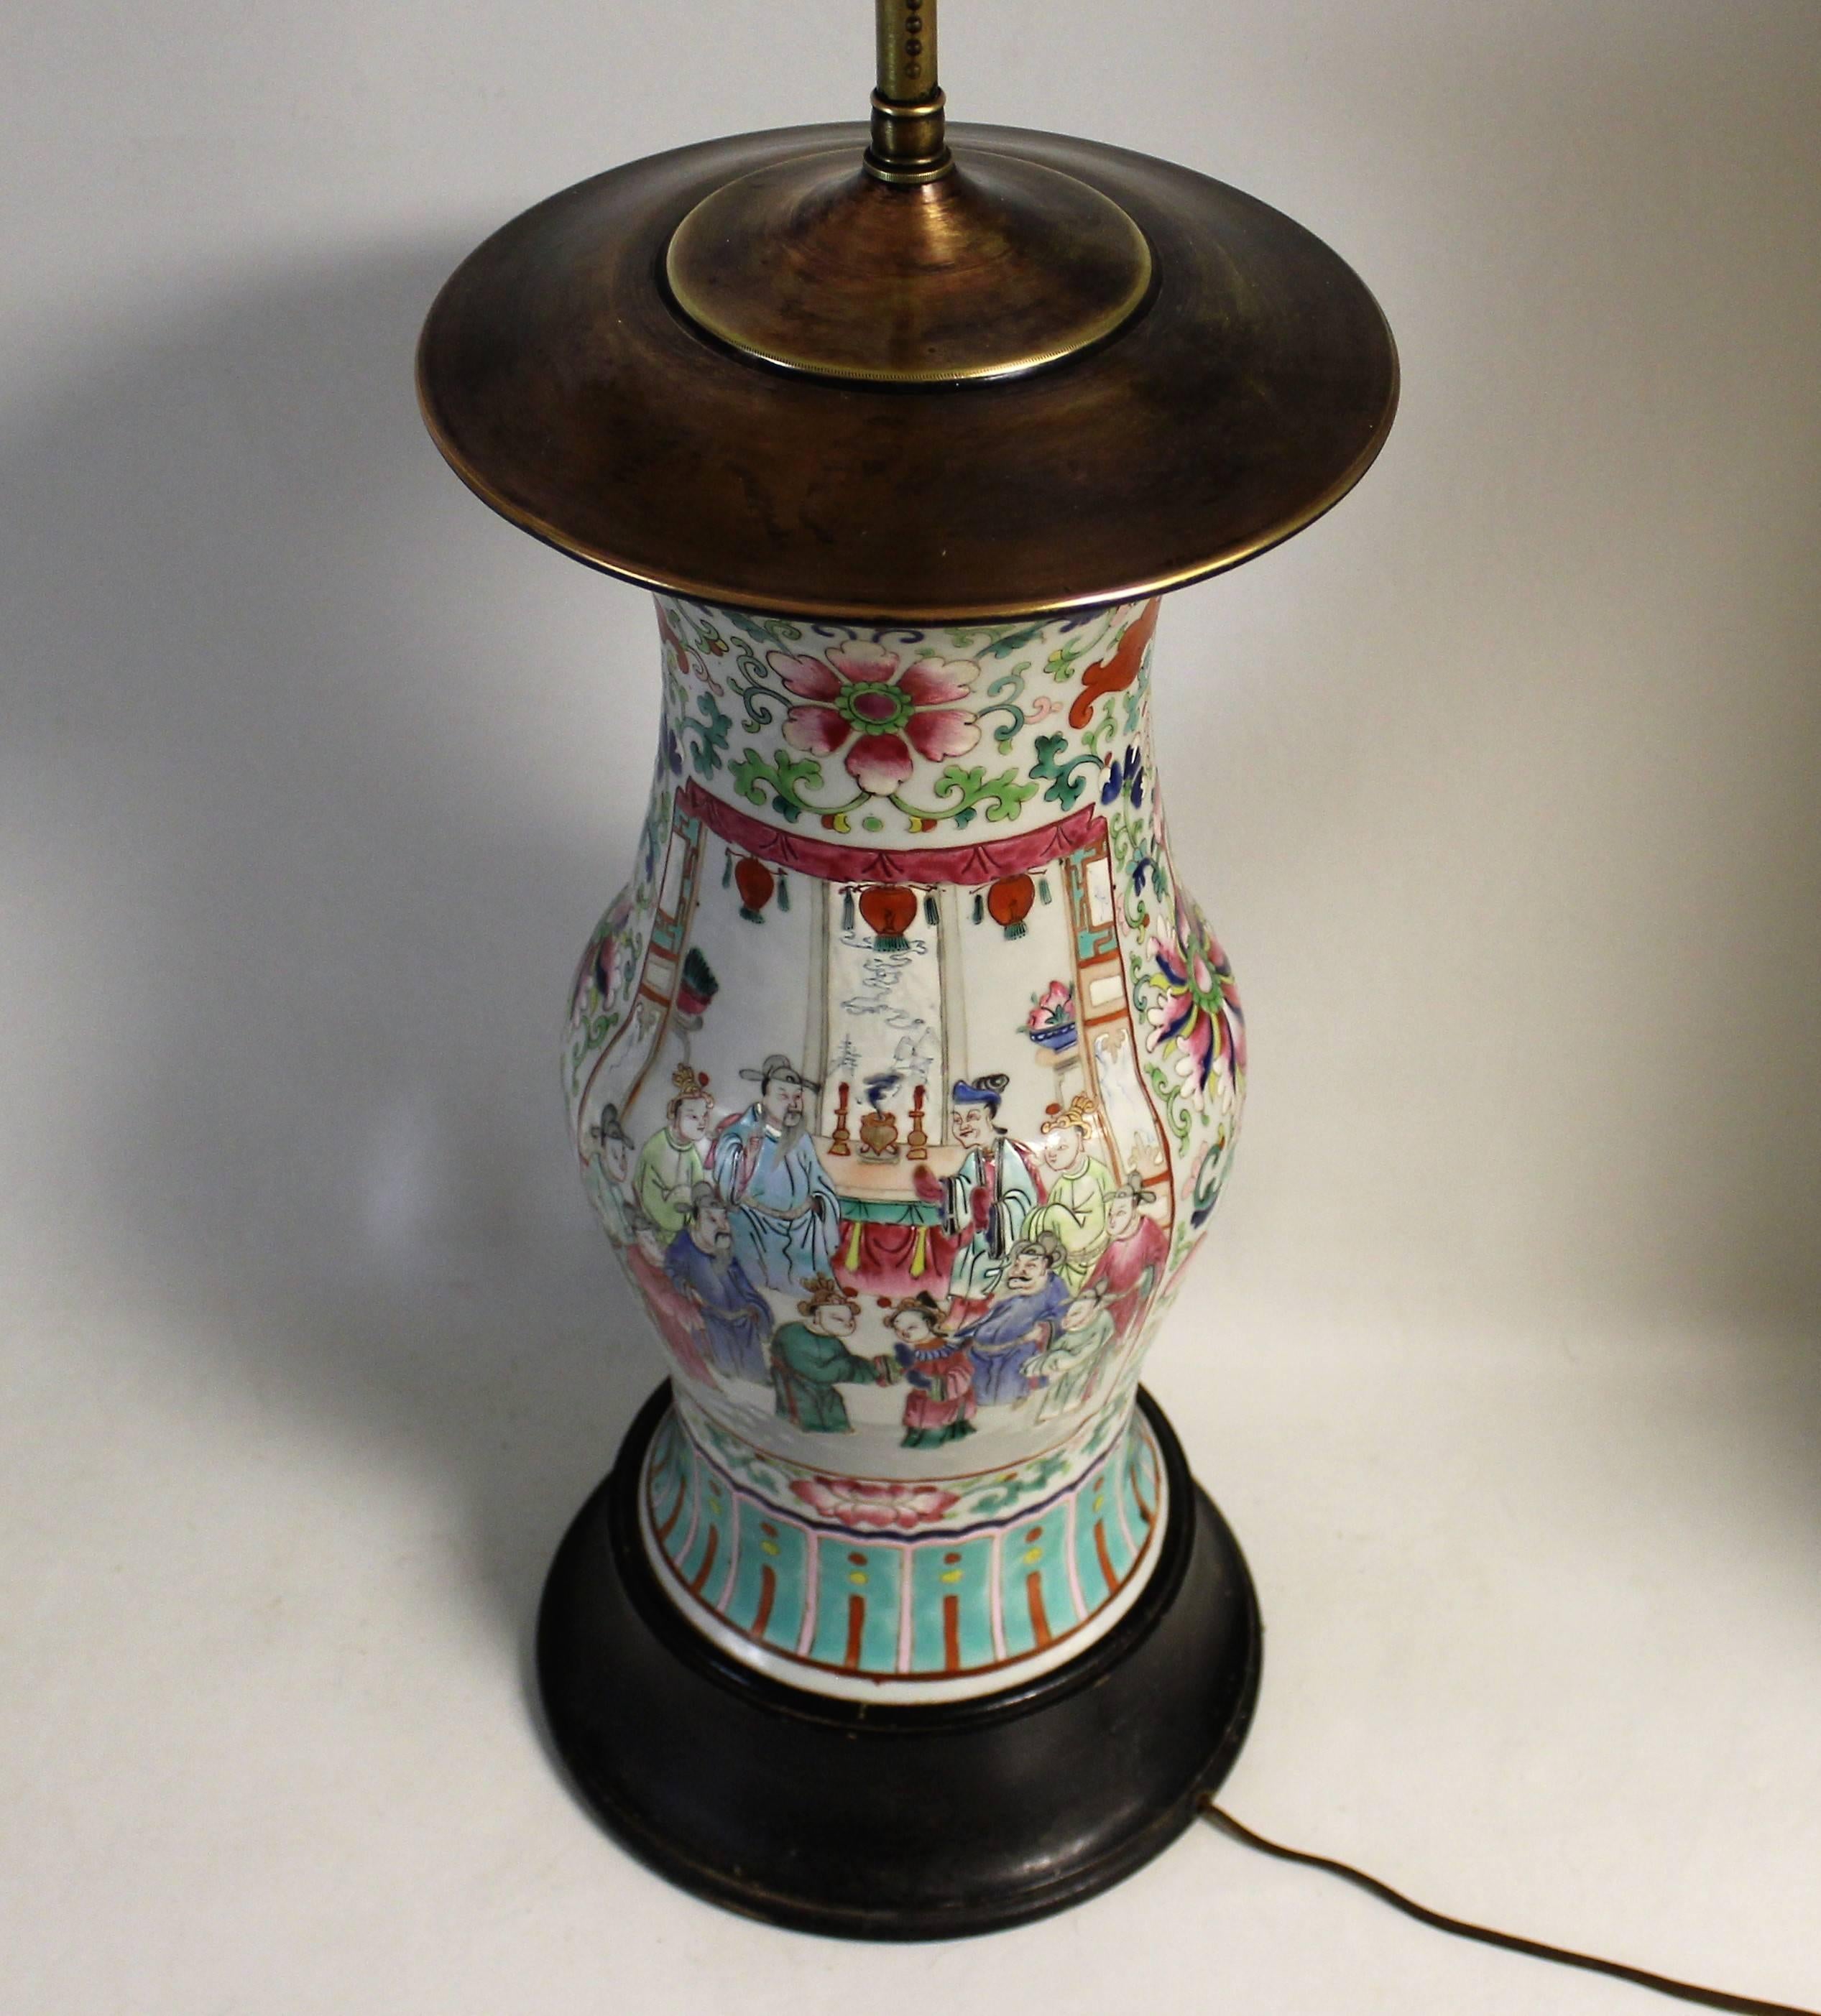 Early 20th century, Chinese porcelain lamp.